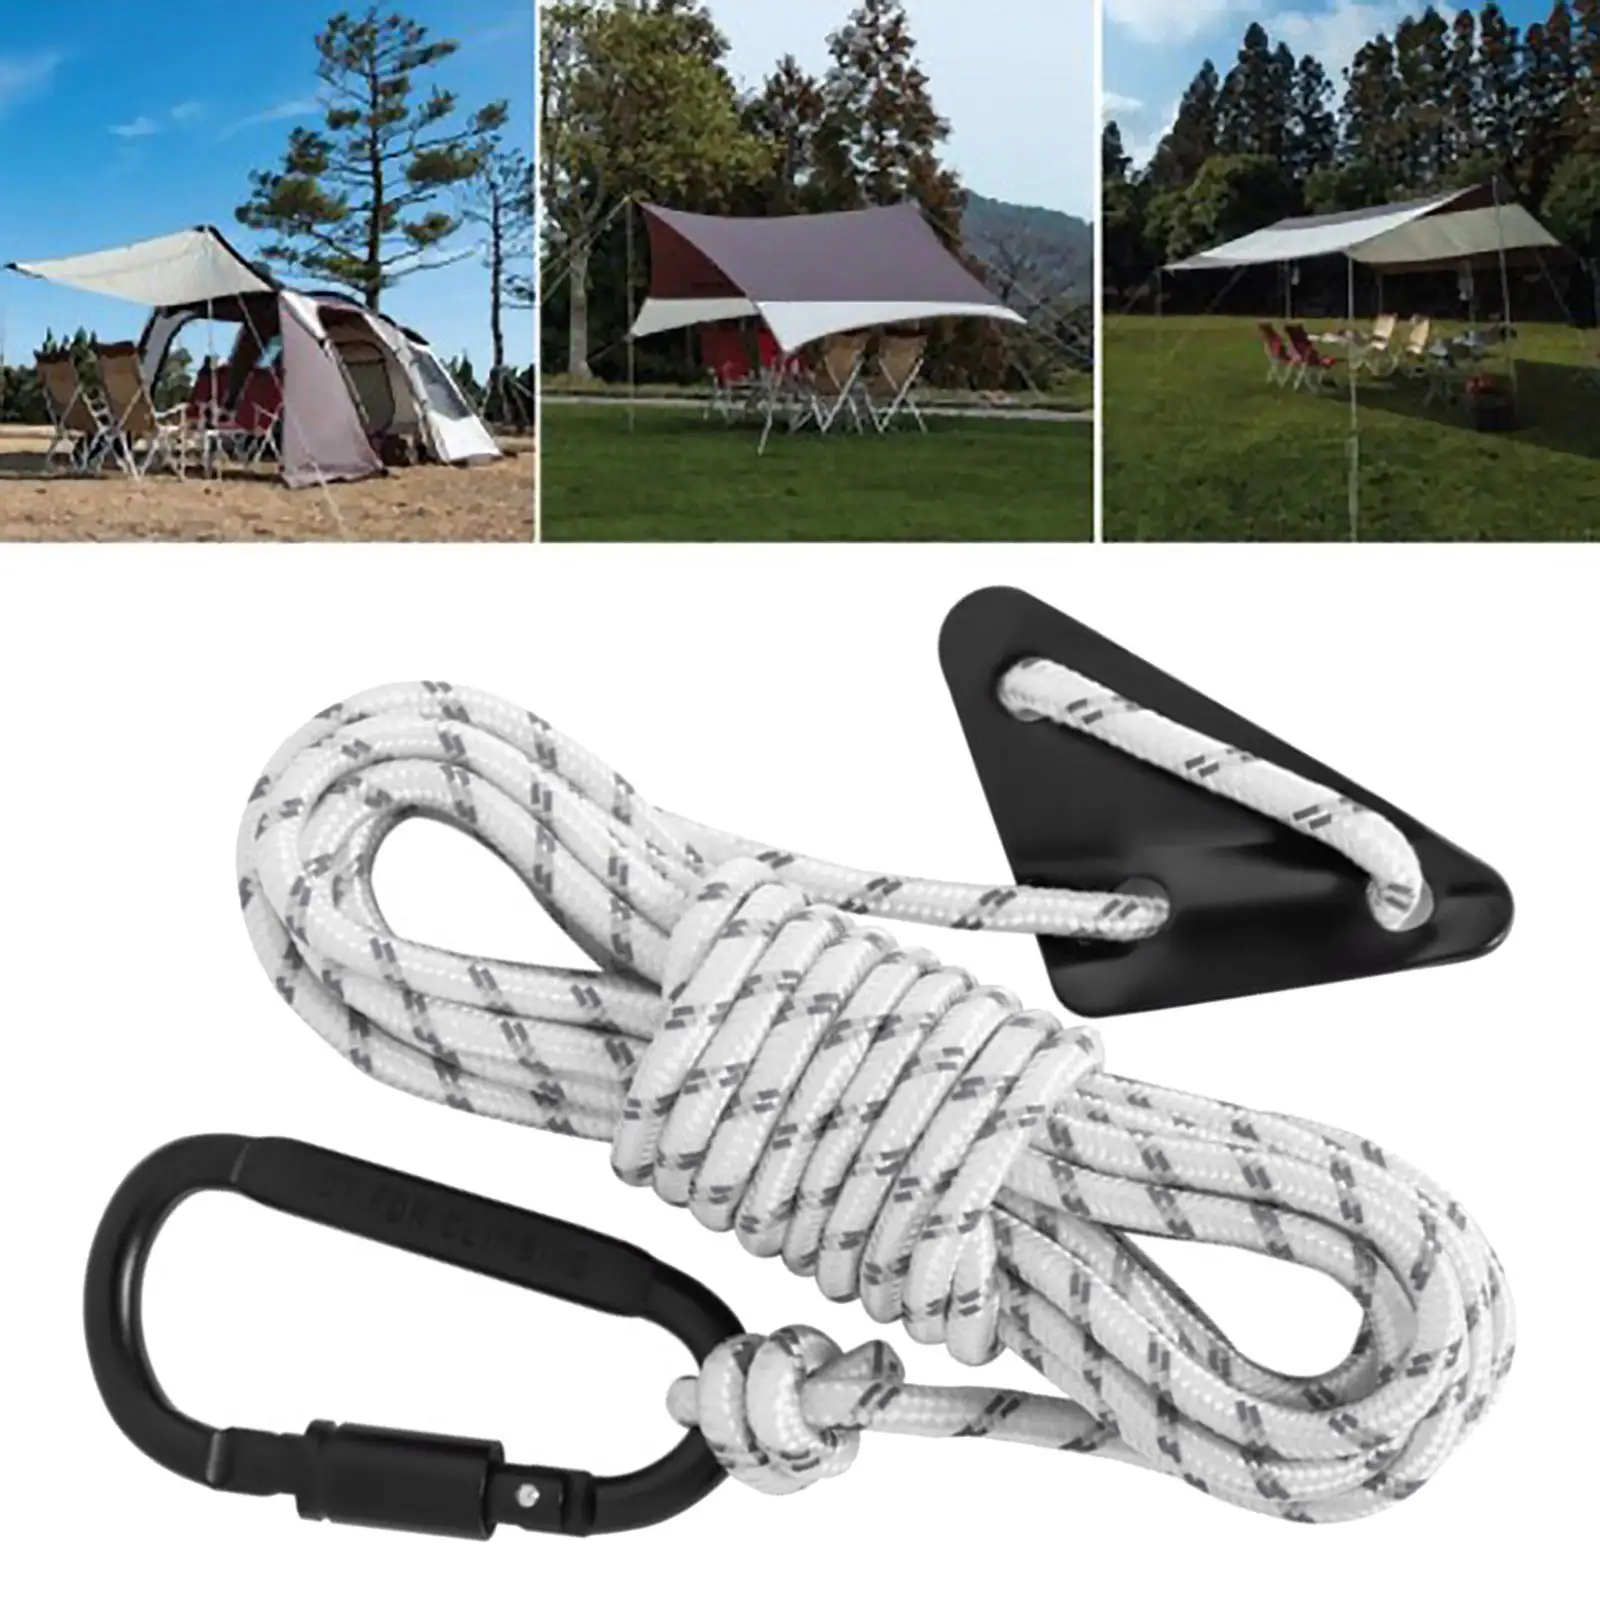 Reflective Tent guyline 5mm 5M Long Lightweight Wind Rope for Outdoor Canopy